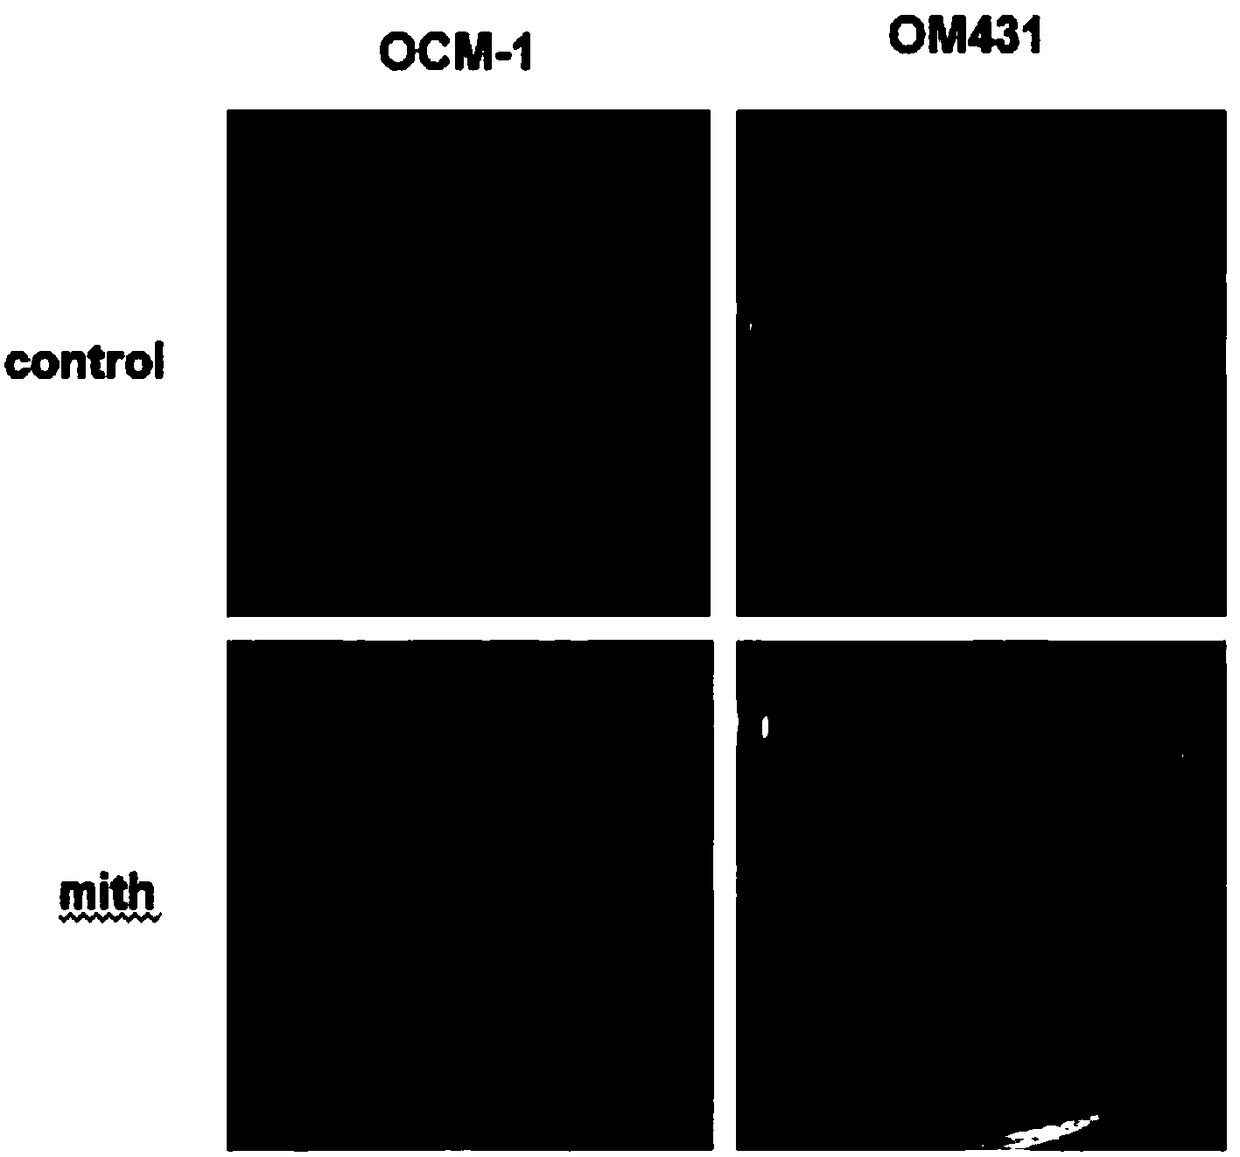 An application of a transcription factor Spl specific inhibitor in preparation of medicines treating uveal melanoma